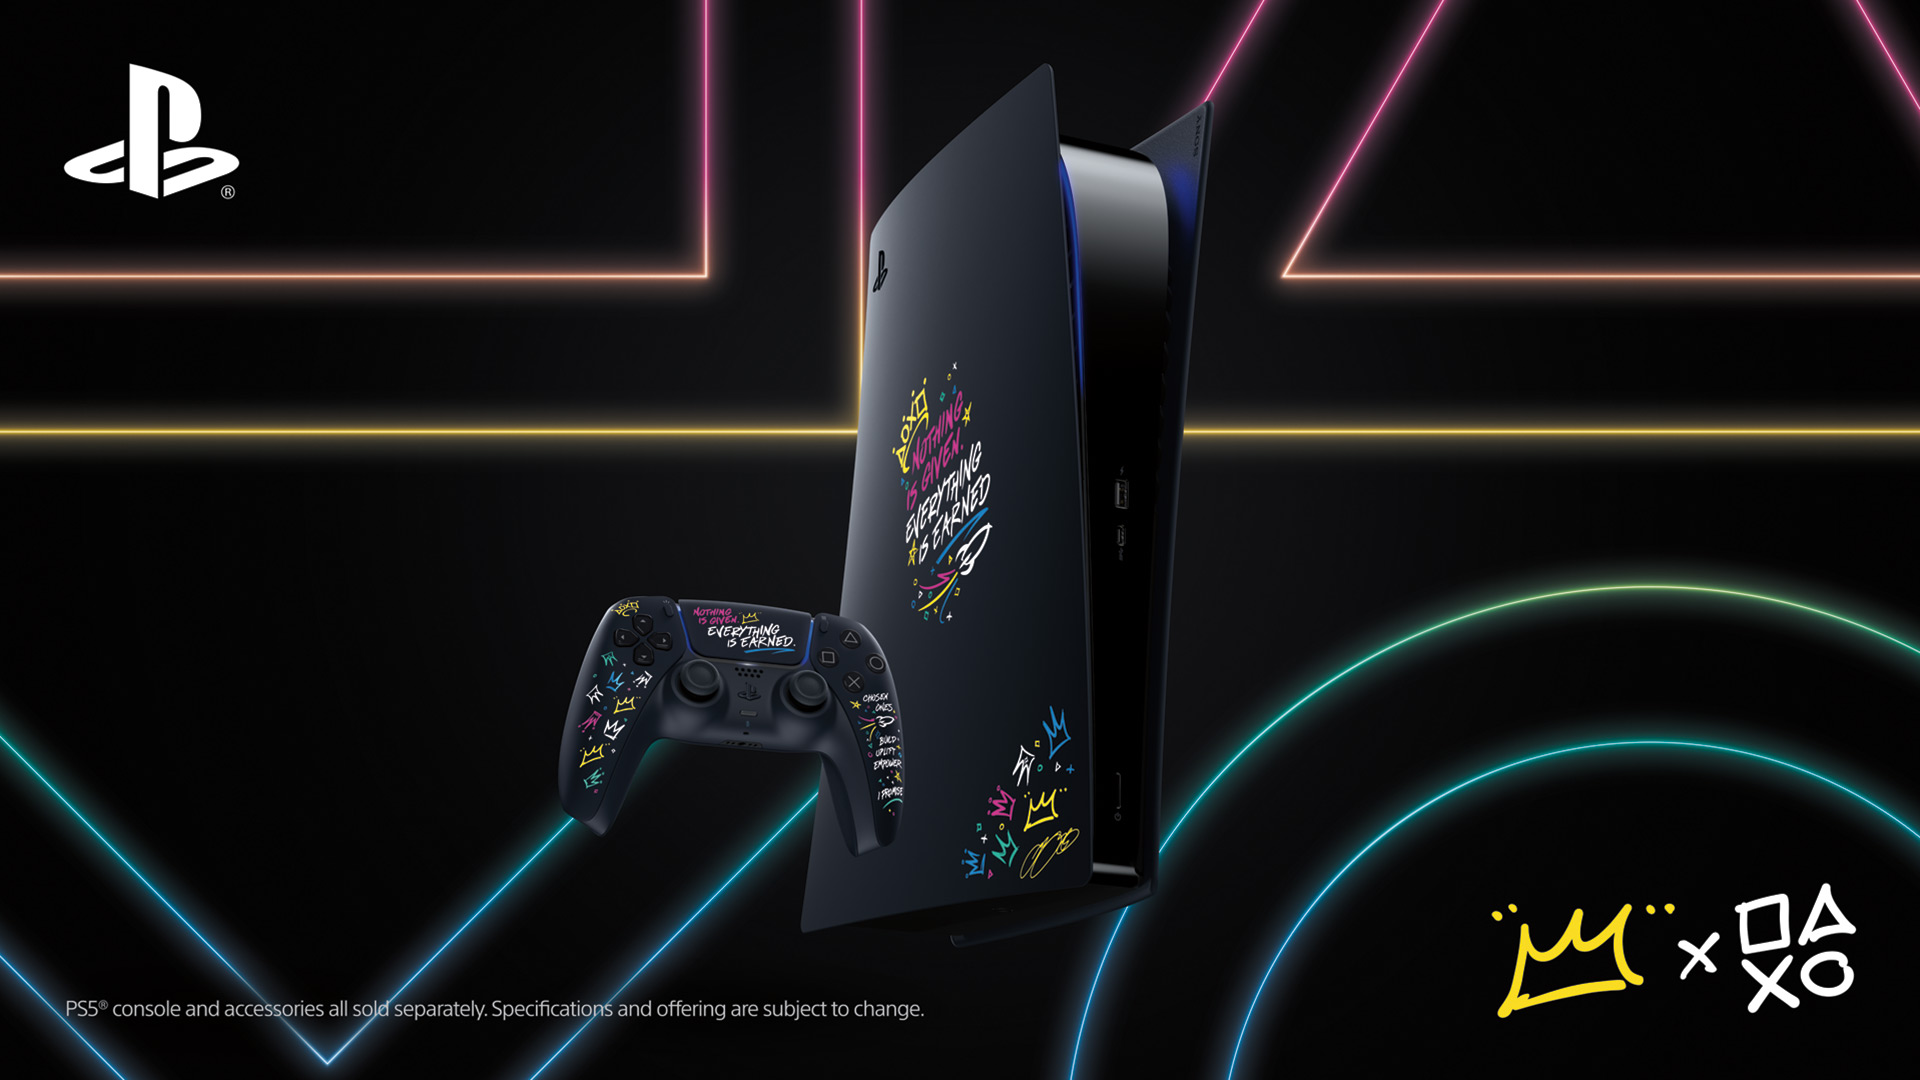 The Lebron James PlayStation 5 accessories launch on July 27